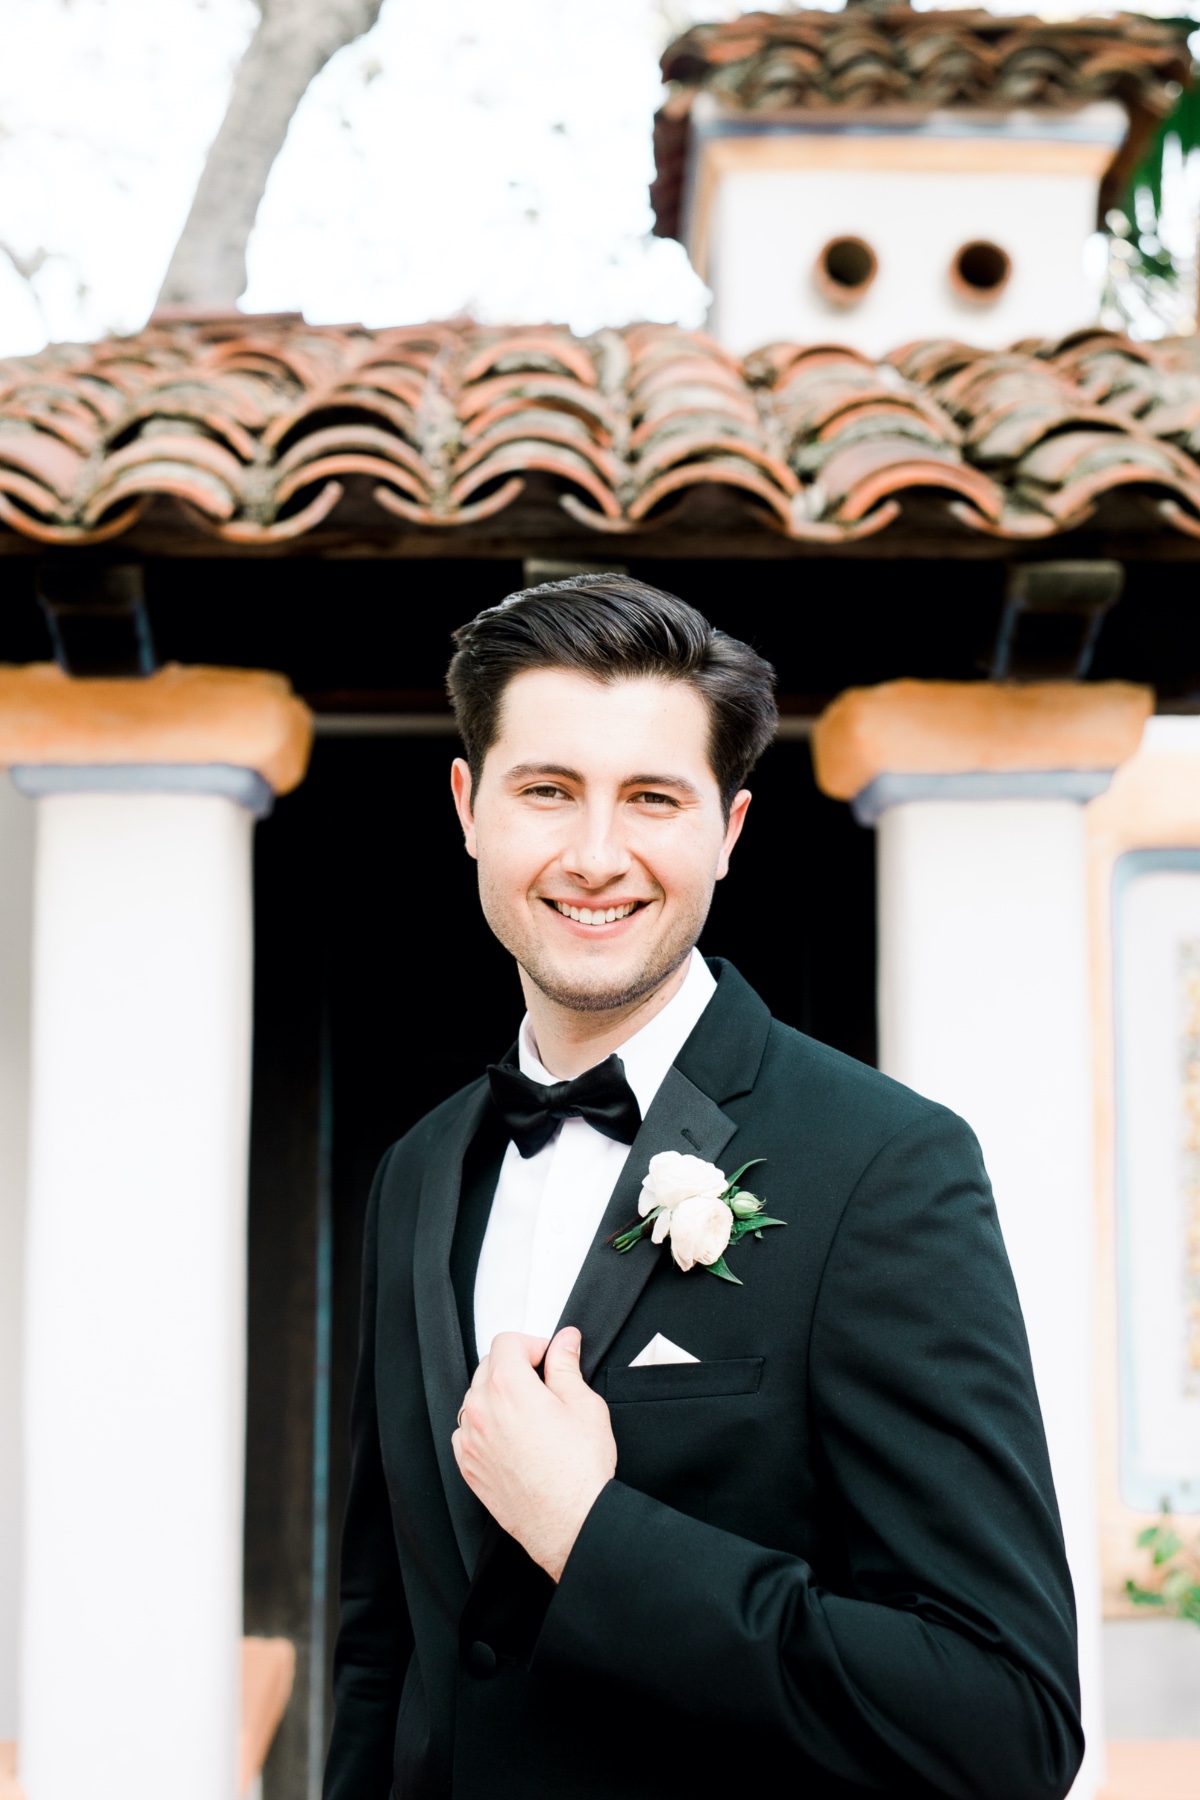 Groom in Tuxedo with white boutonniere